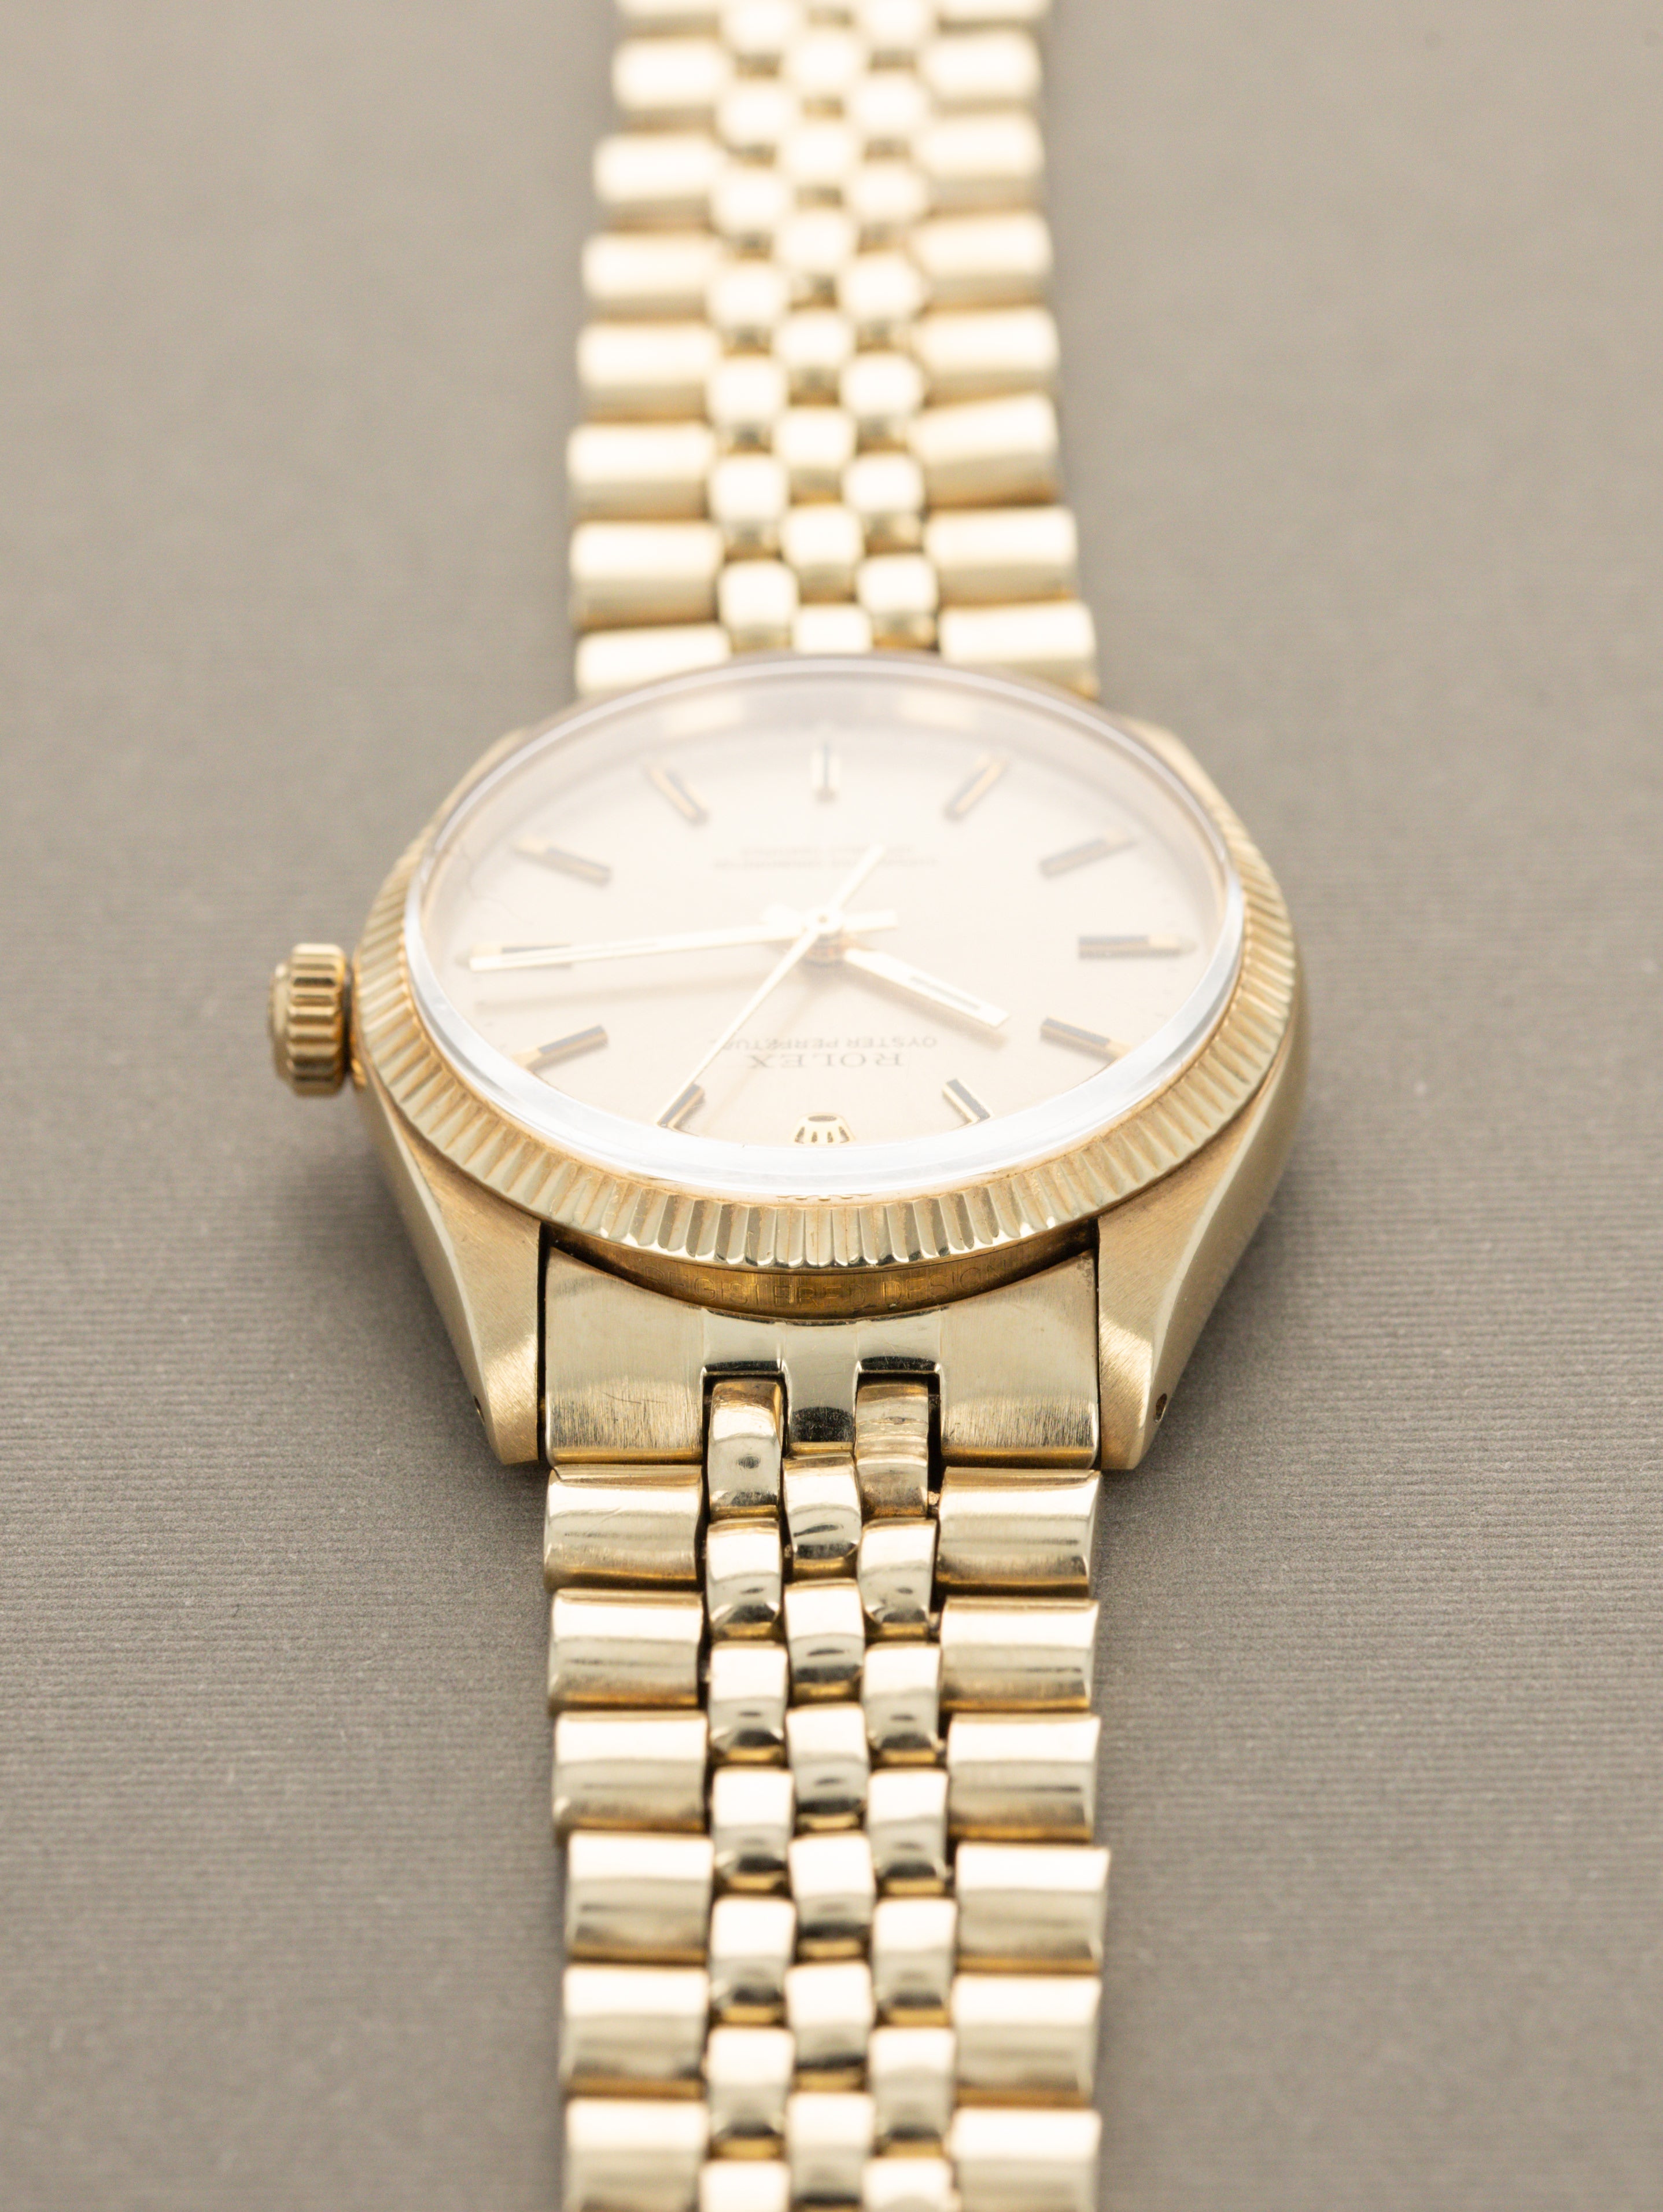 Rolex Oyster Perpetual Ref. 1005 - 14K Yellow Gold